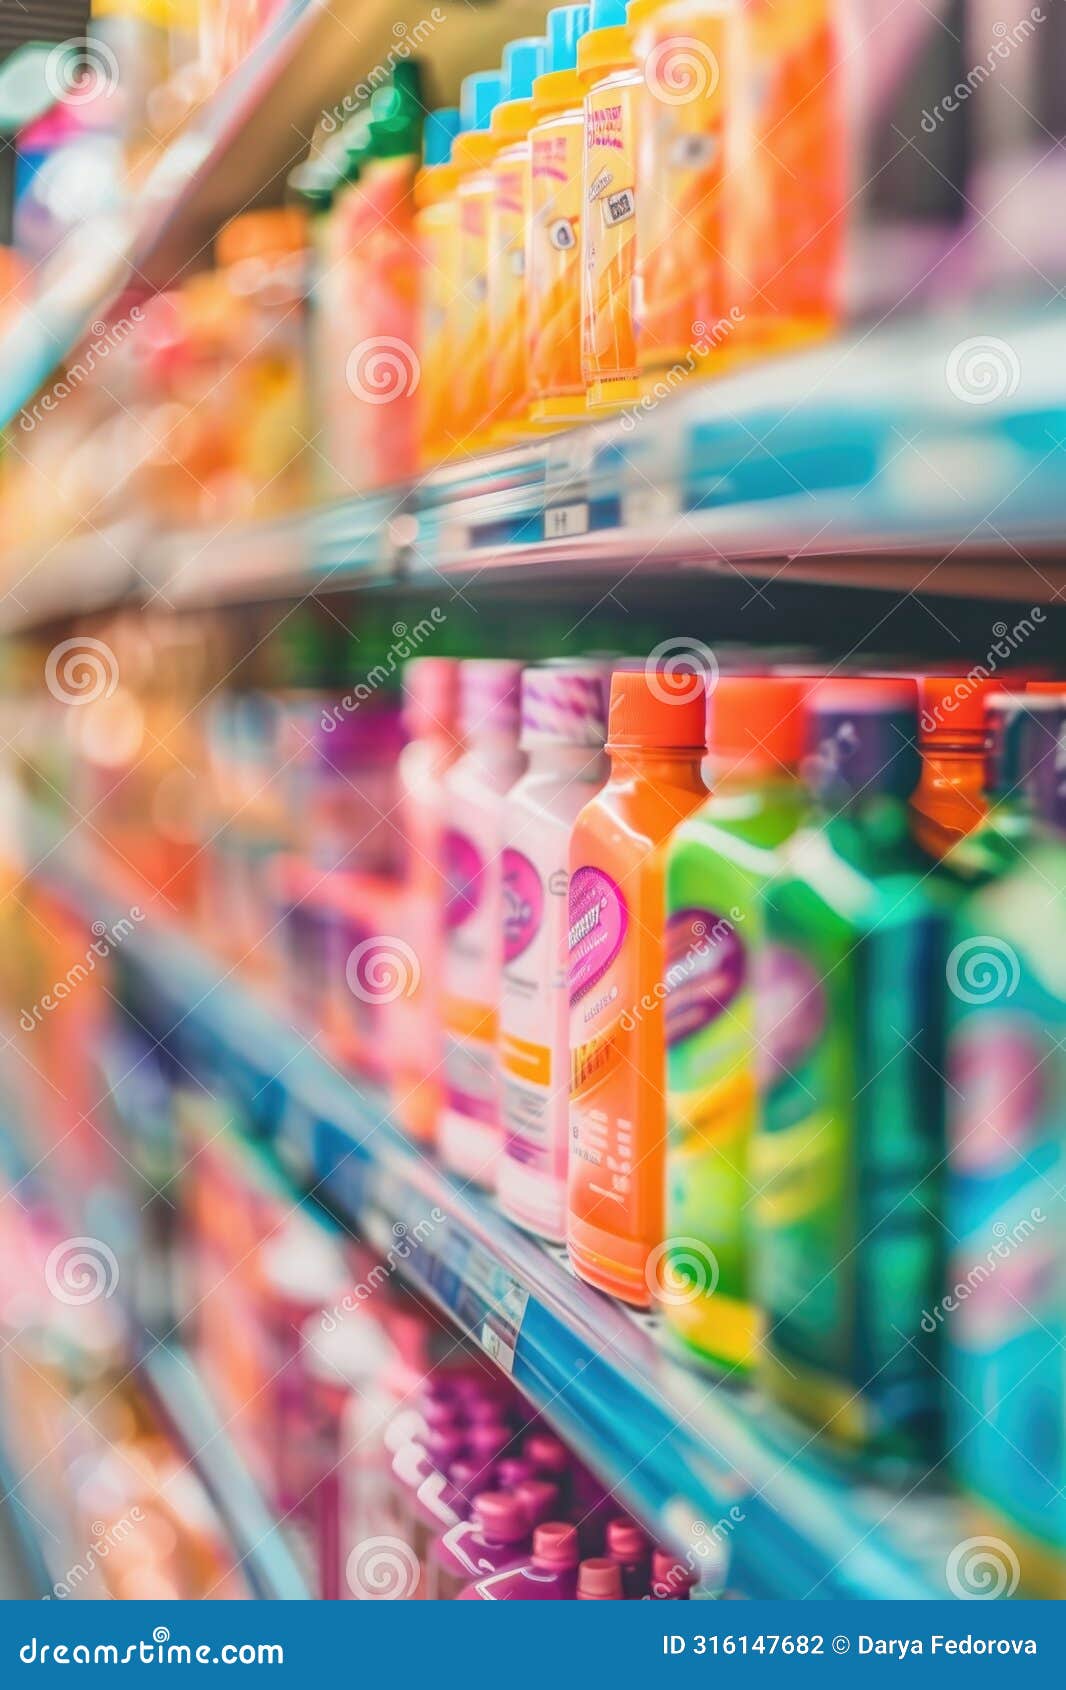 supermarket aisles with colorful products in soft focus background